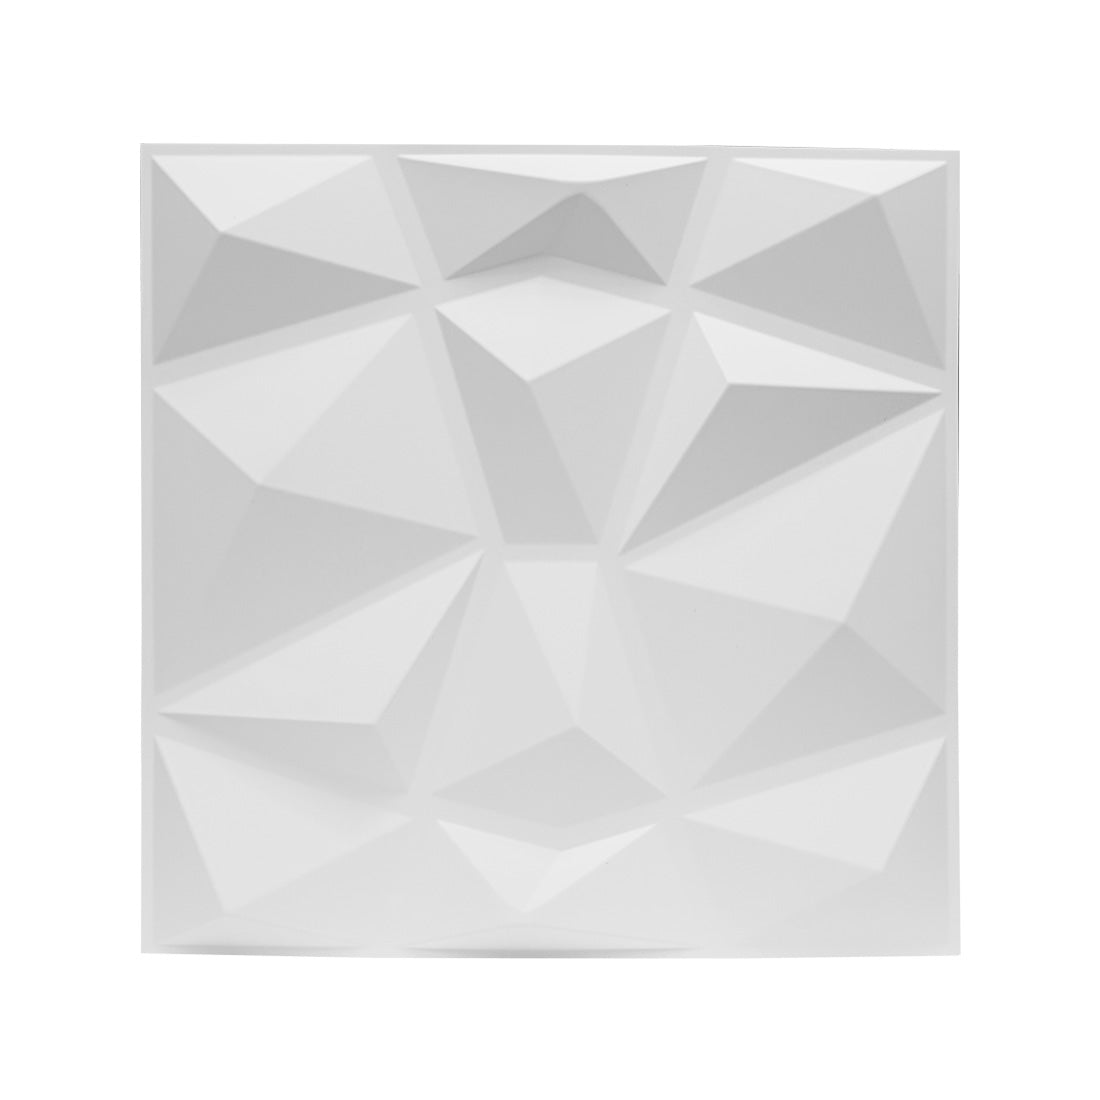 3D Abstract Wall Panel - 5 Pieces - White - لوحة جدار